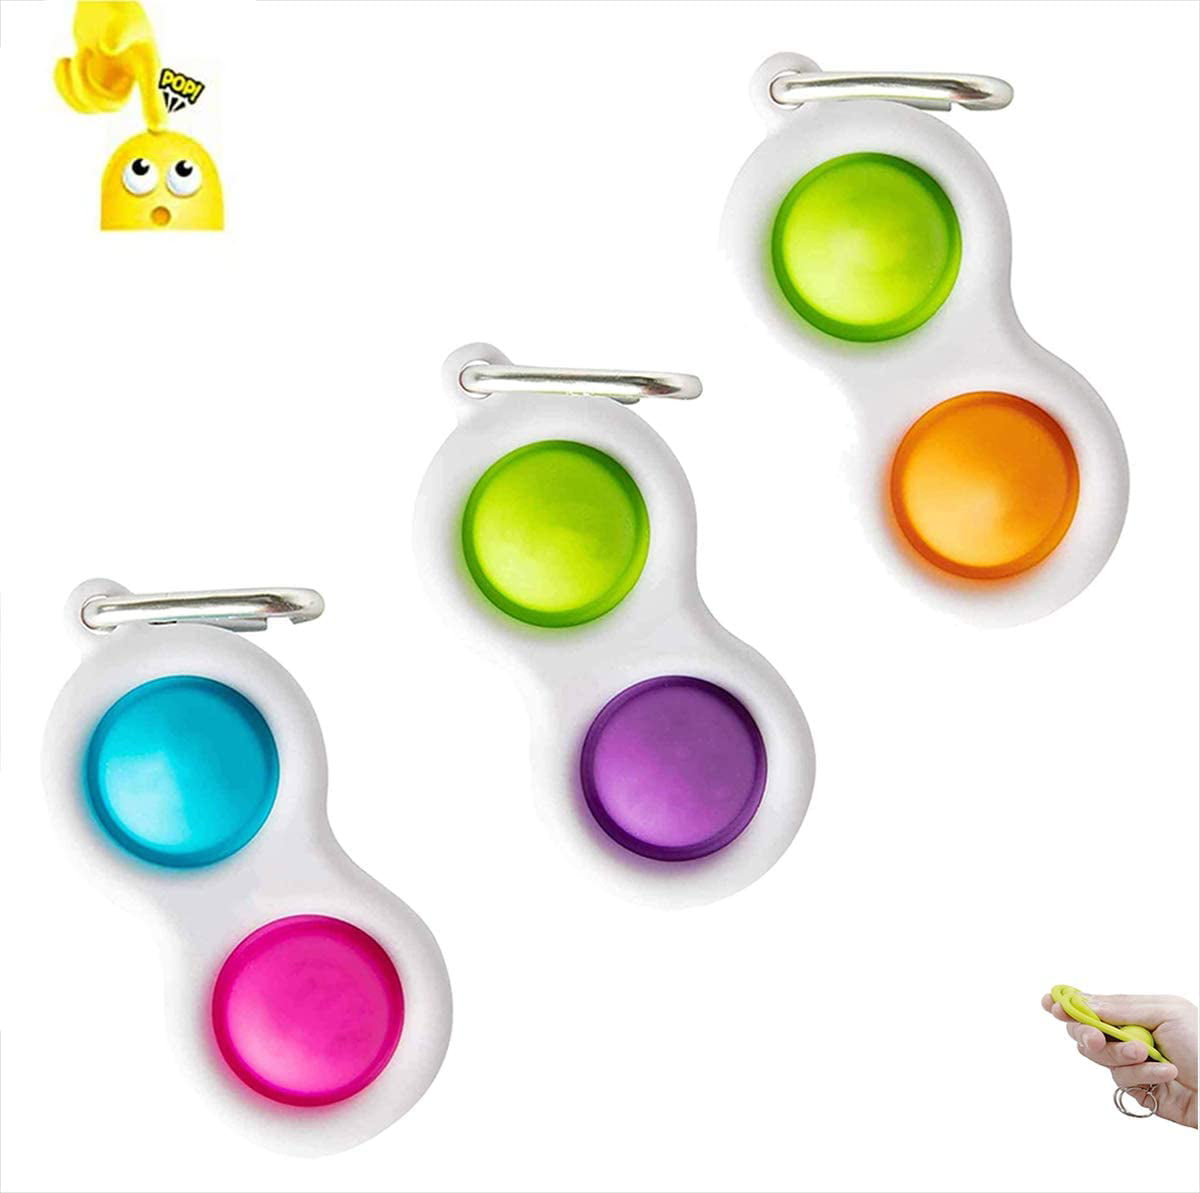 years Kids Adult Gift Details about   Baby Simple Dimple Sensory Toys Silicone Flipping Board 3 